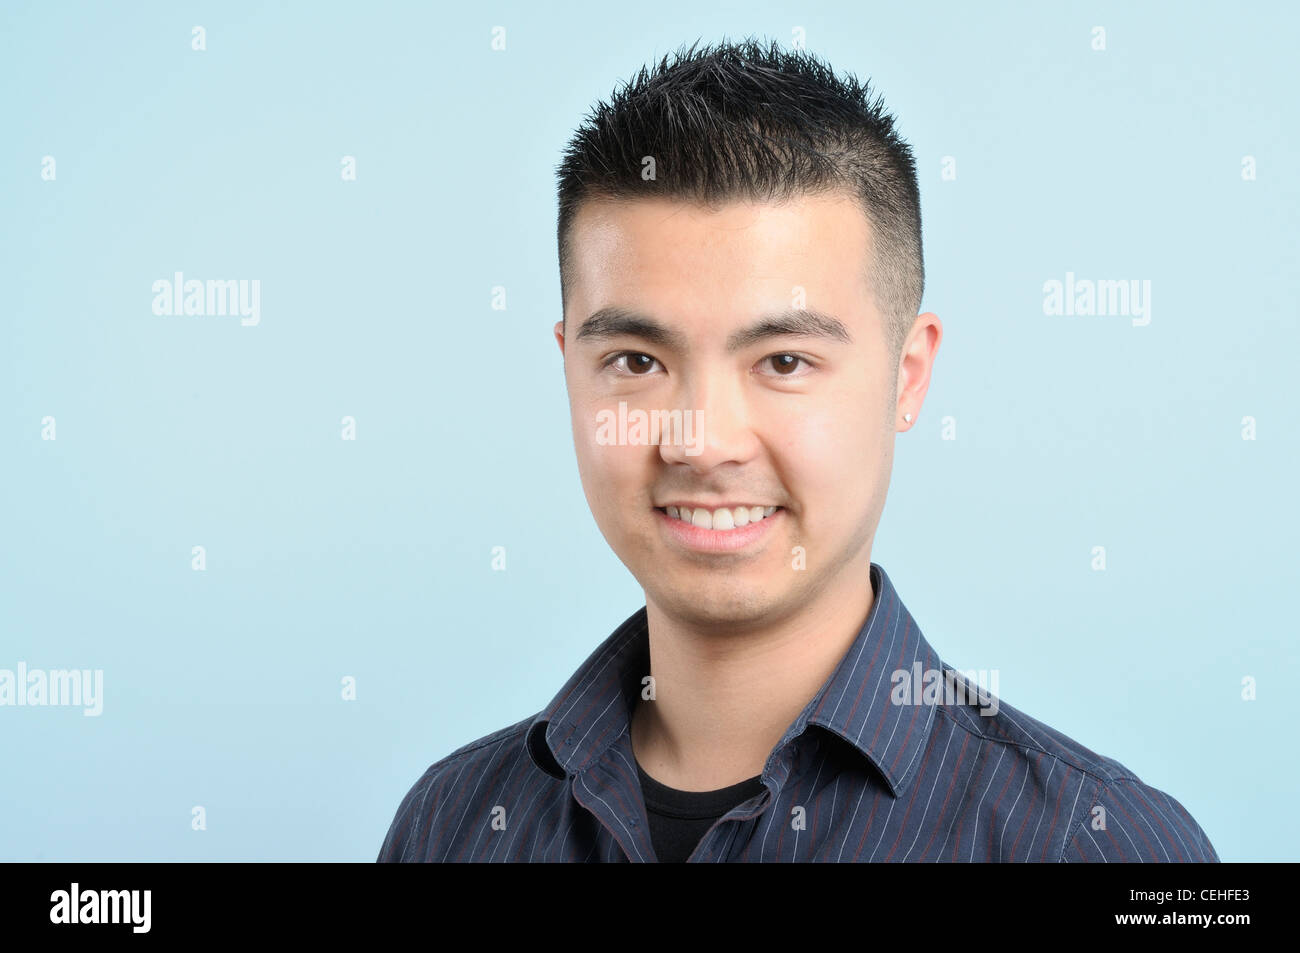 Head shot of a young Asian male in a blue and striped shirt Stock Photo -  Alamy